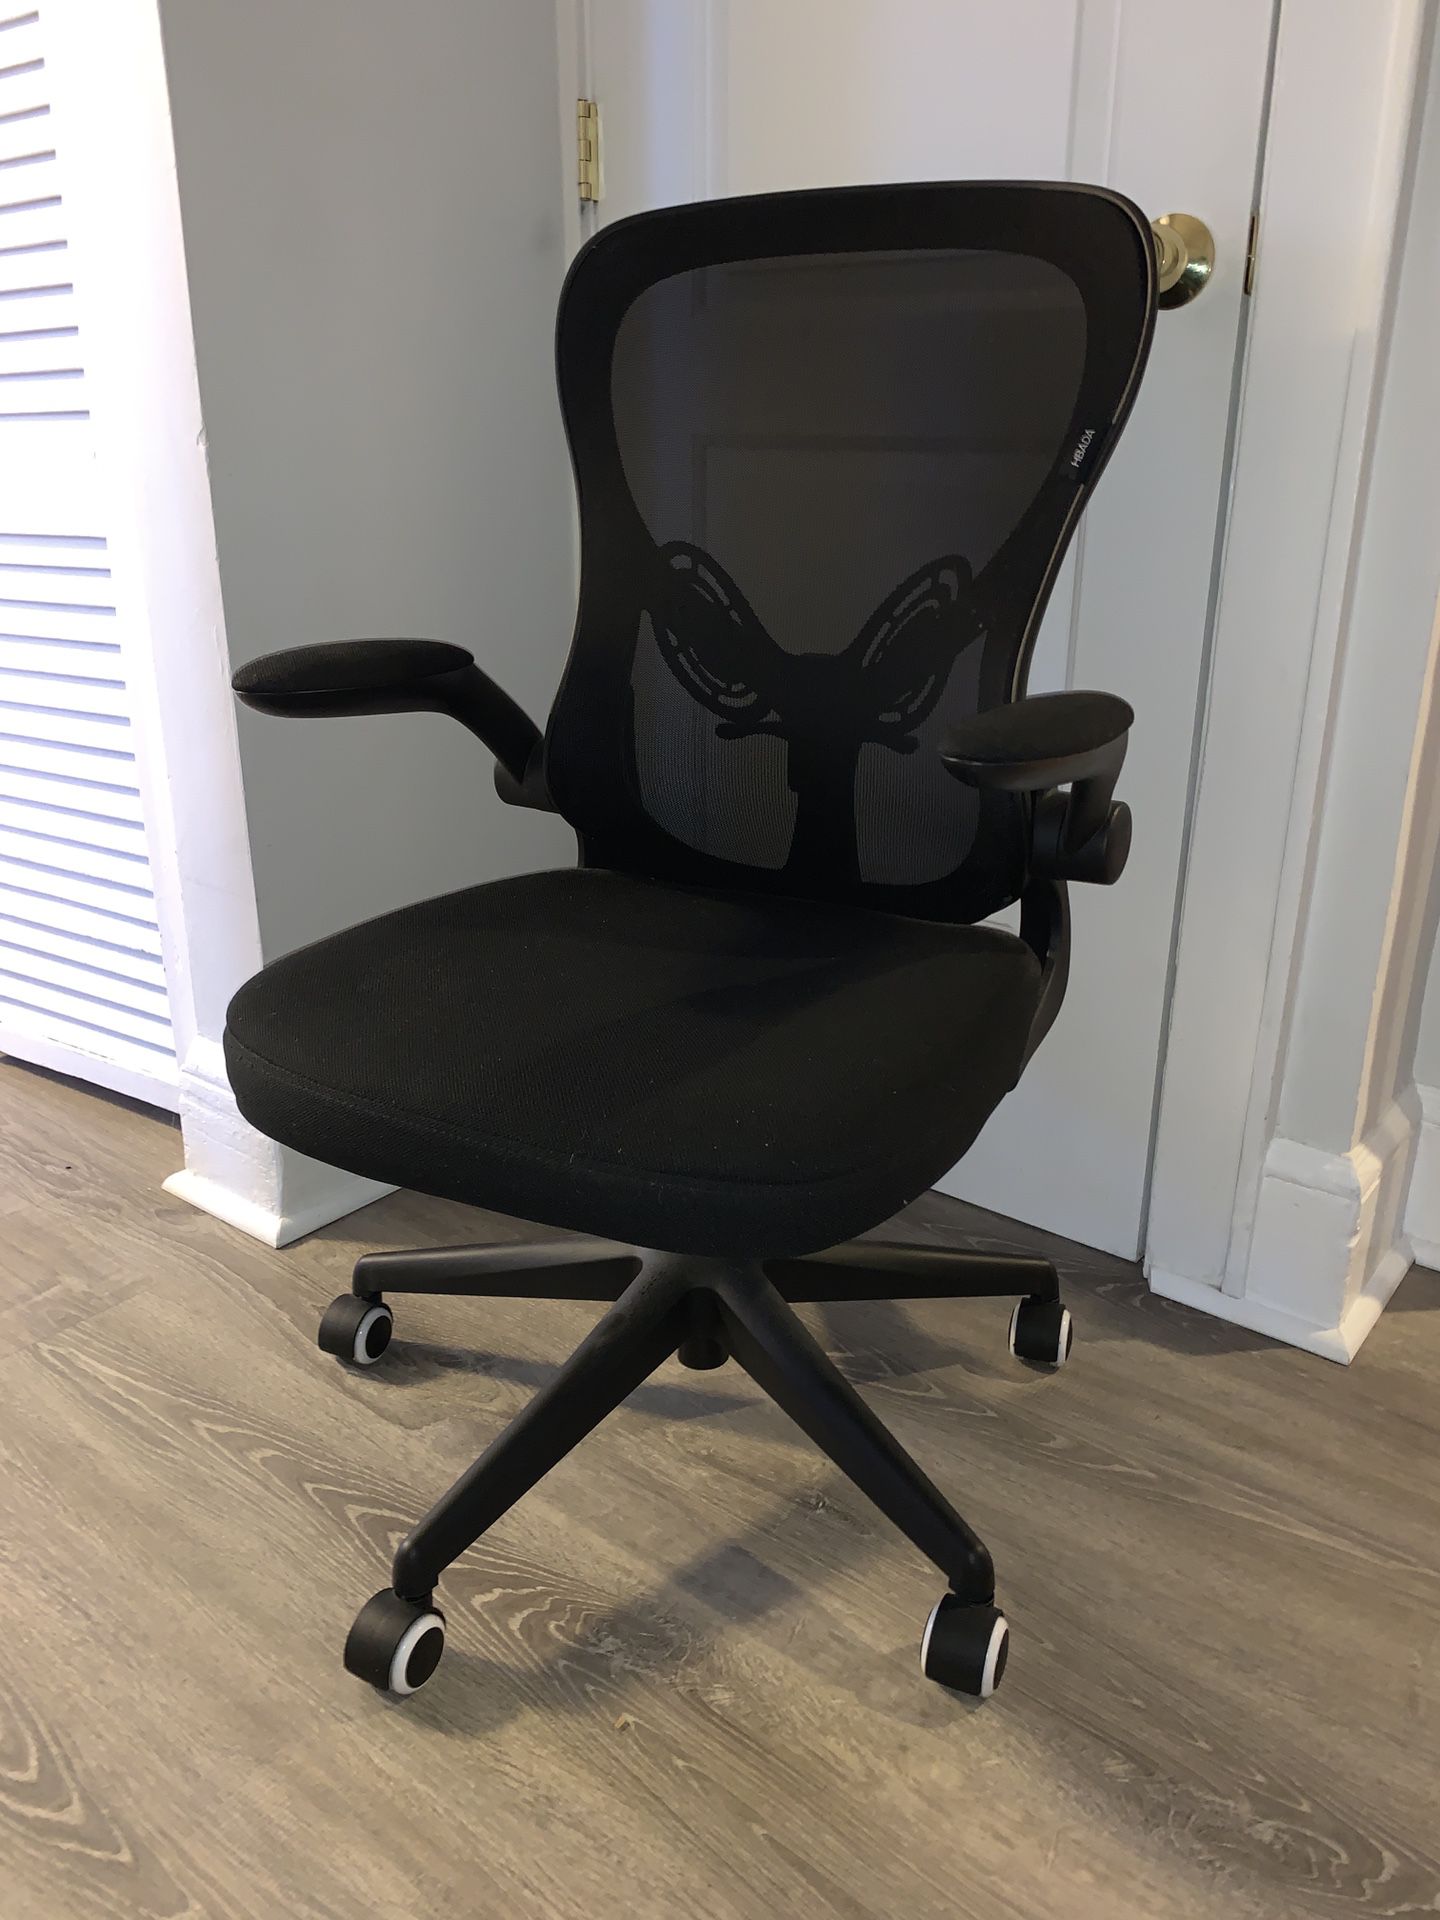 Hbada Office Computer Chair, Ergonomic Desk Chair, Computer Mesh Chair with Lumbar Support and Flip-up Arms,Black